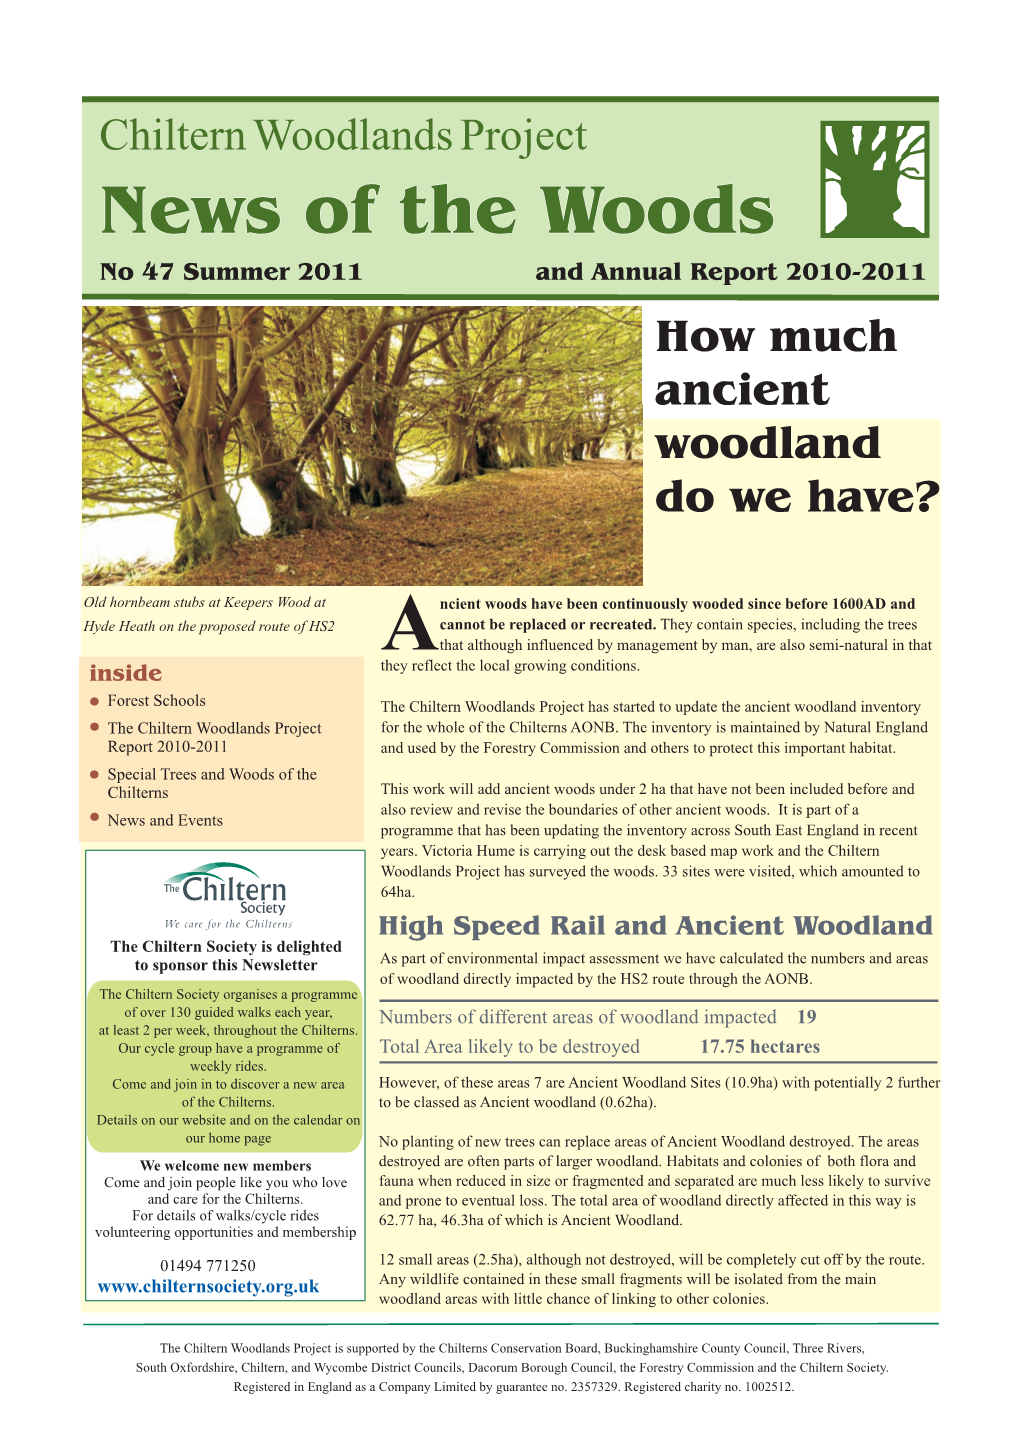 News of the Woods No 47 Summer 2011 and Annual Report 2010-2011 How Much Ancient Woodland Do We Have?